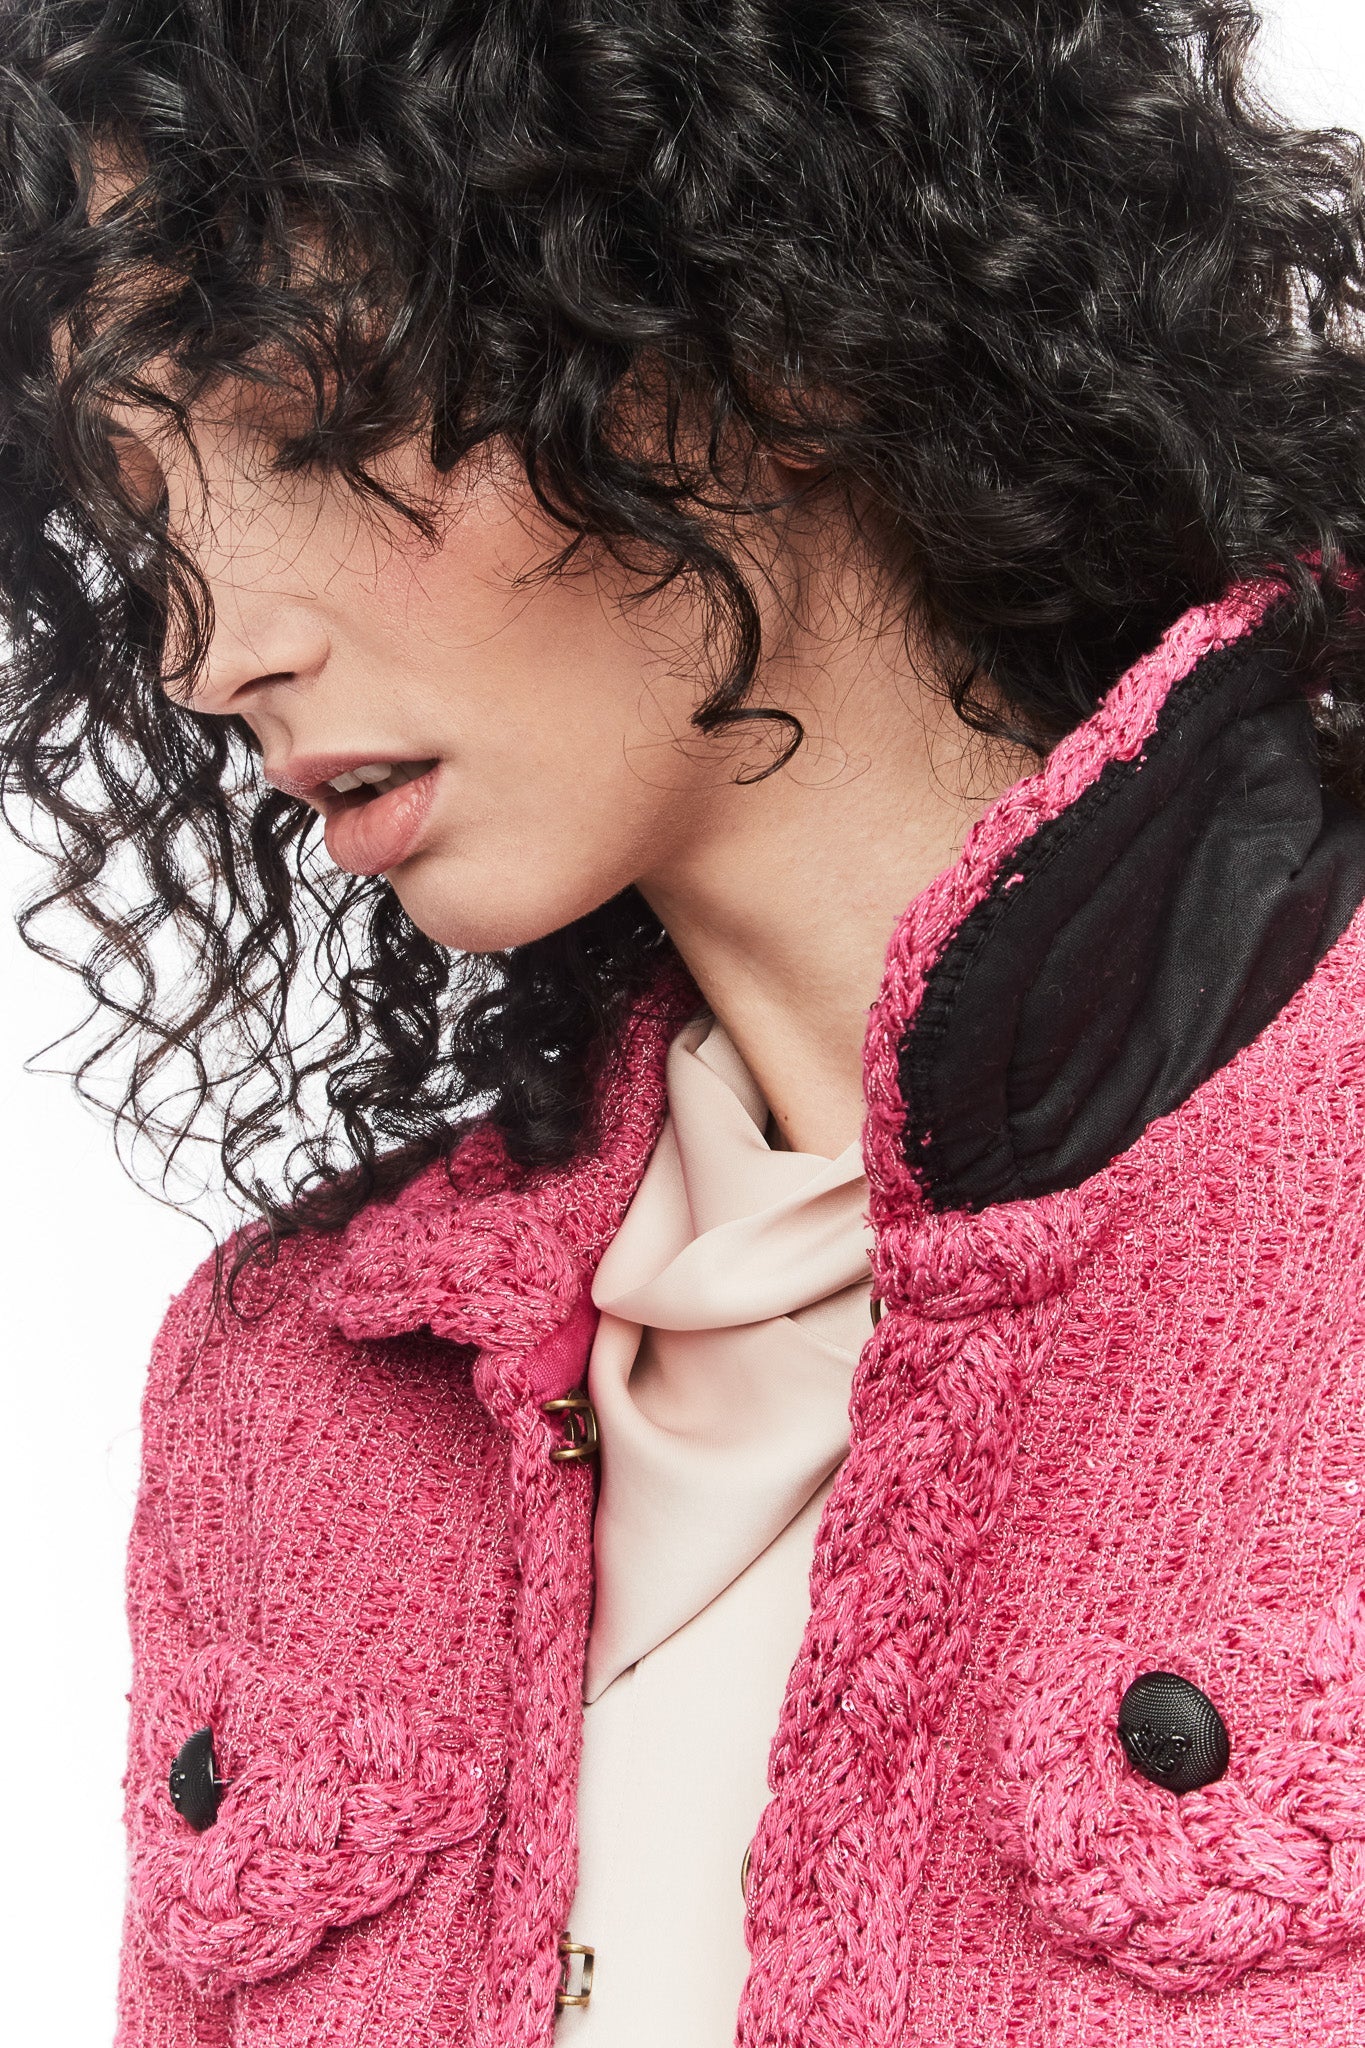 CHAQUETA FUCSIA TWEED AGNES - THE EXTREME COLLECTION